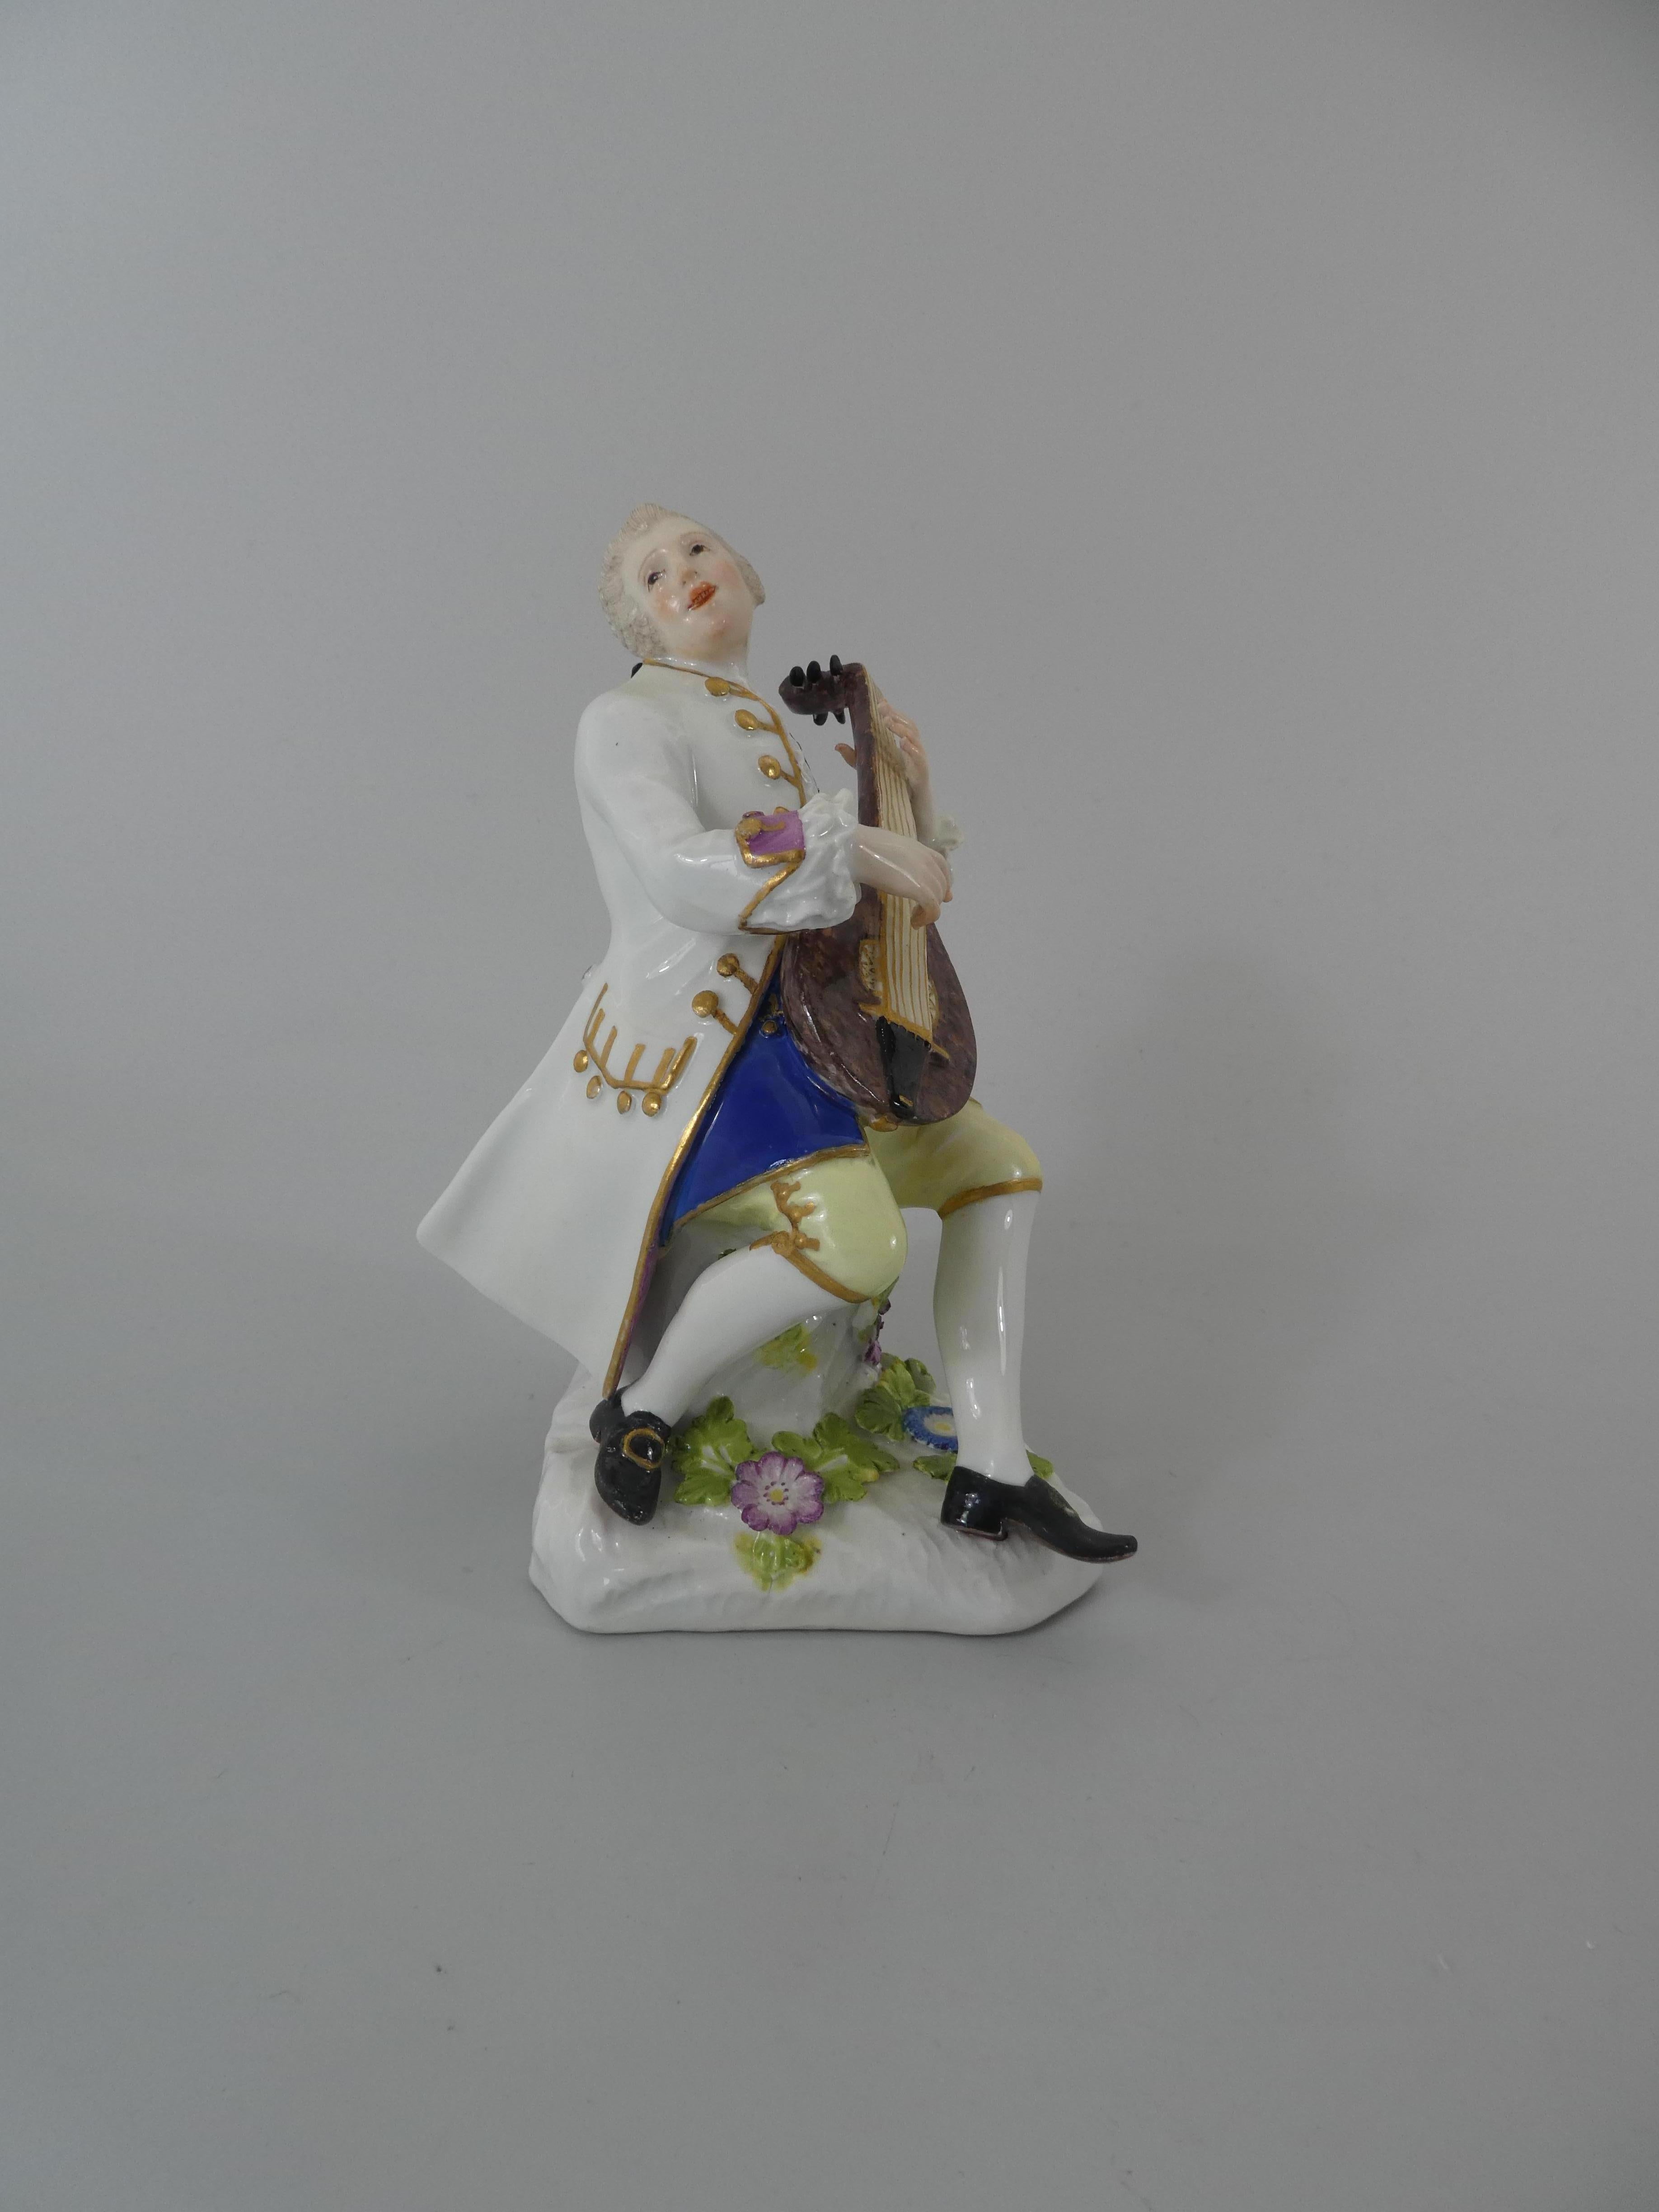 A fine Meissen porcelain figure, circa 1740. Modelled by Peter Reinicke, as seated man playing the lute. He wears a white coat, edged in puce and gilt, and yellow breeches. The irregular shaped base, applied with flowers and leaves.
Blue crossed